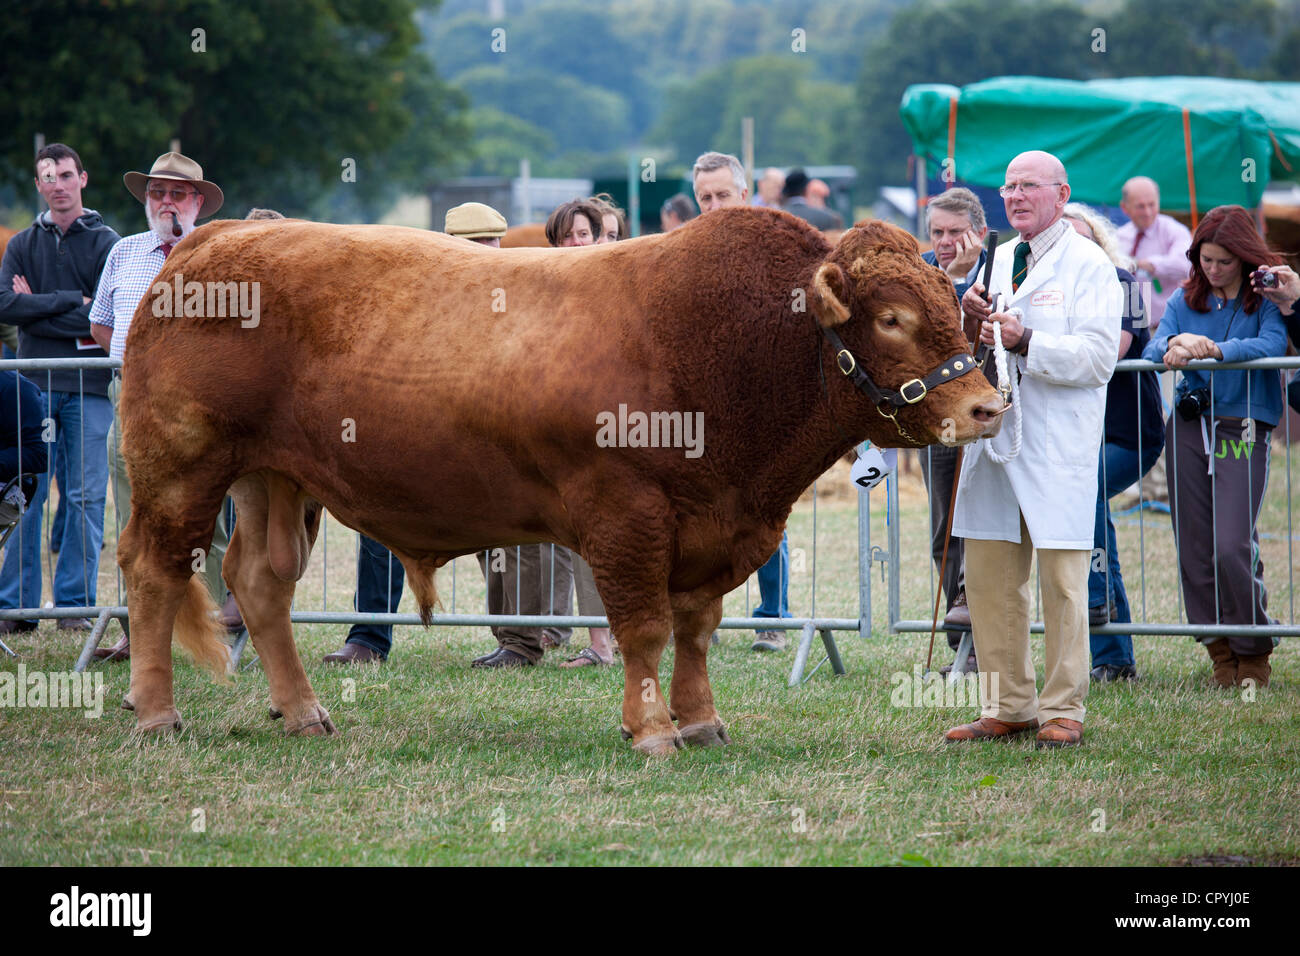 South Devon bull at Moreton Show, agricultural event in Moreton-in-the-Marsh Showground, The Cotswolds, Gloucestershire, UK Stock Photo